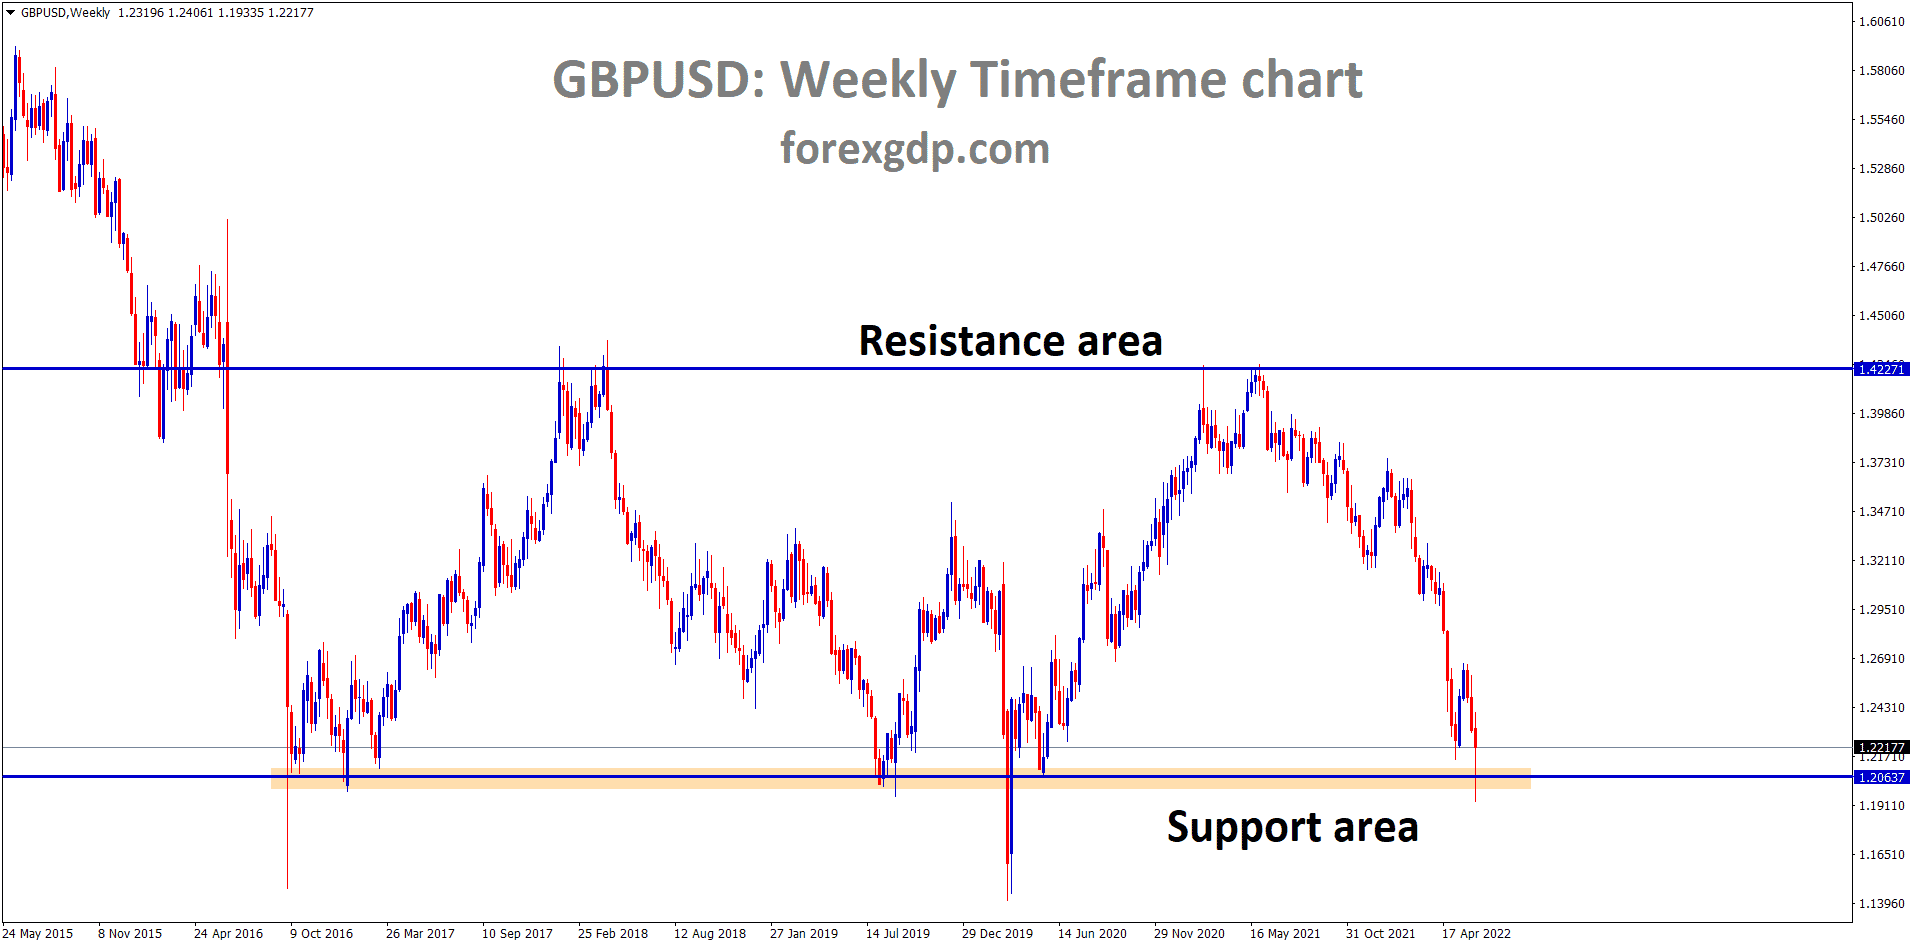 GBPUSD Weekly timeframe showing support and resistance levels